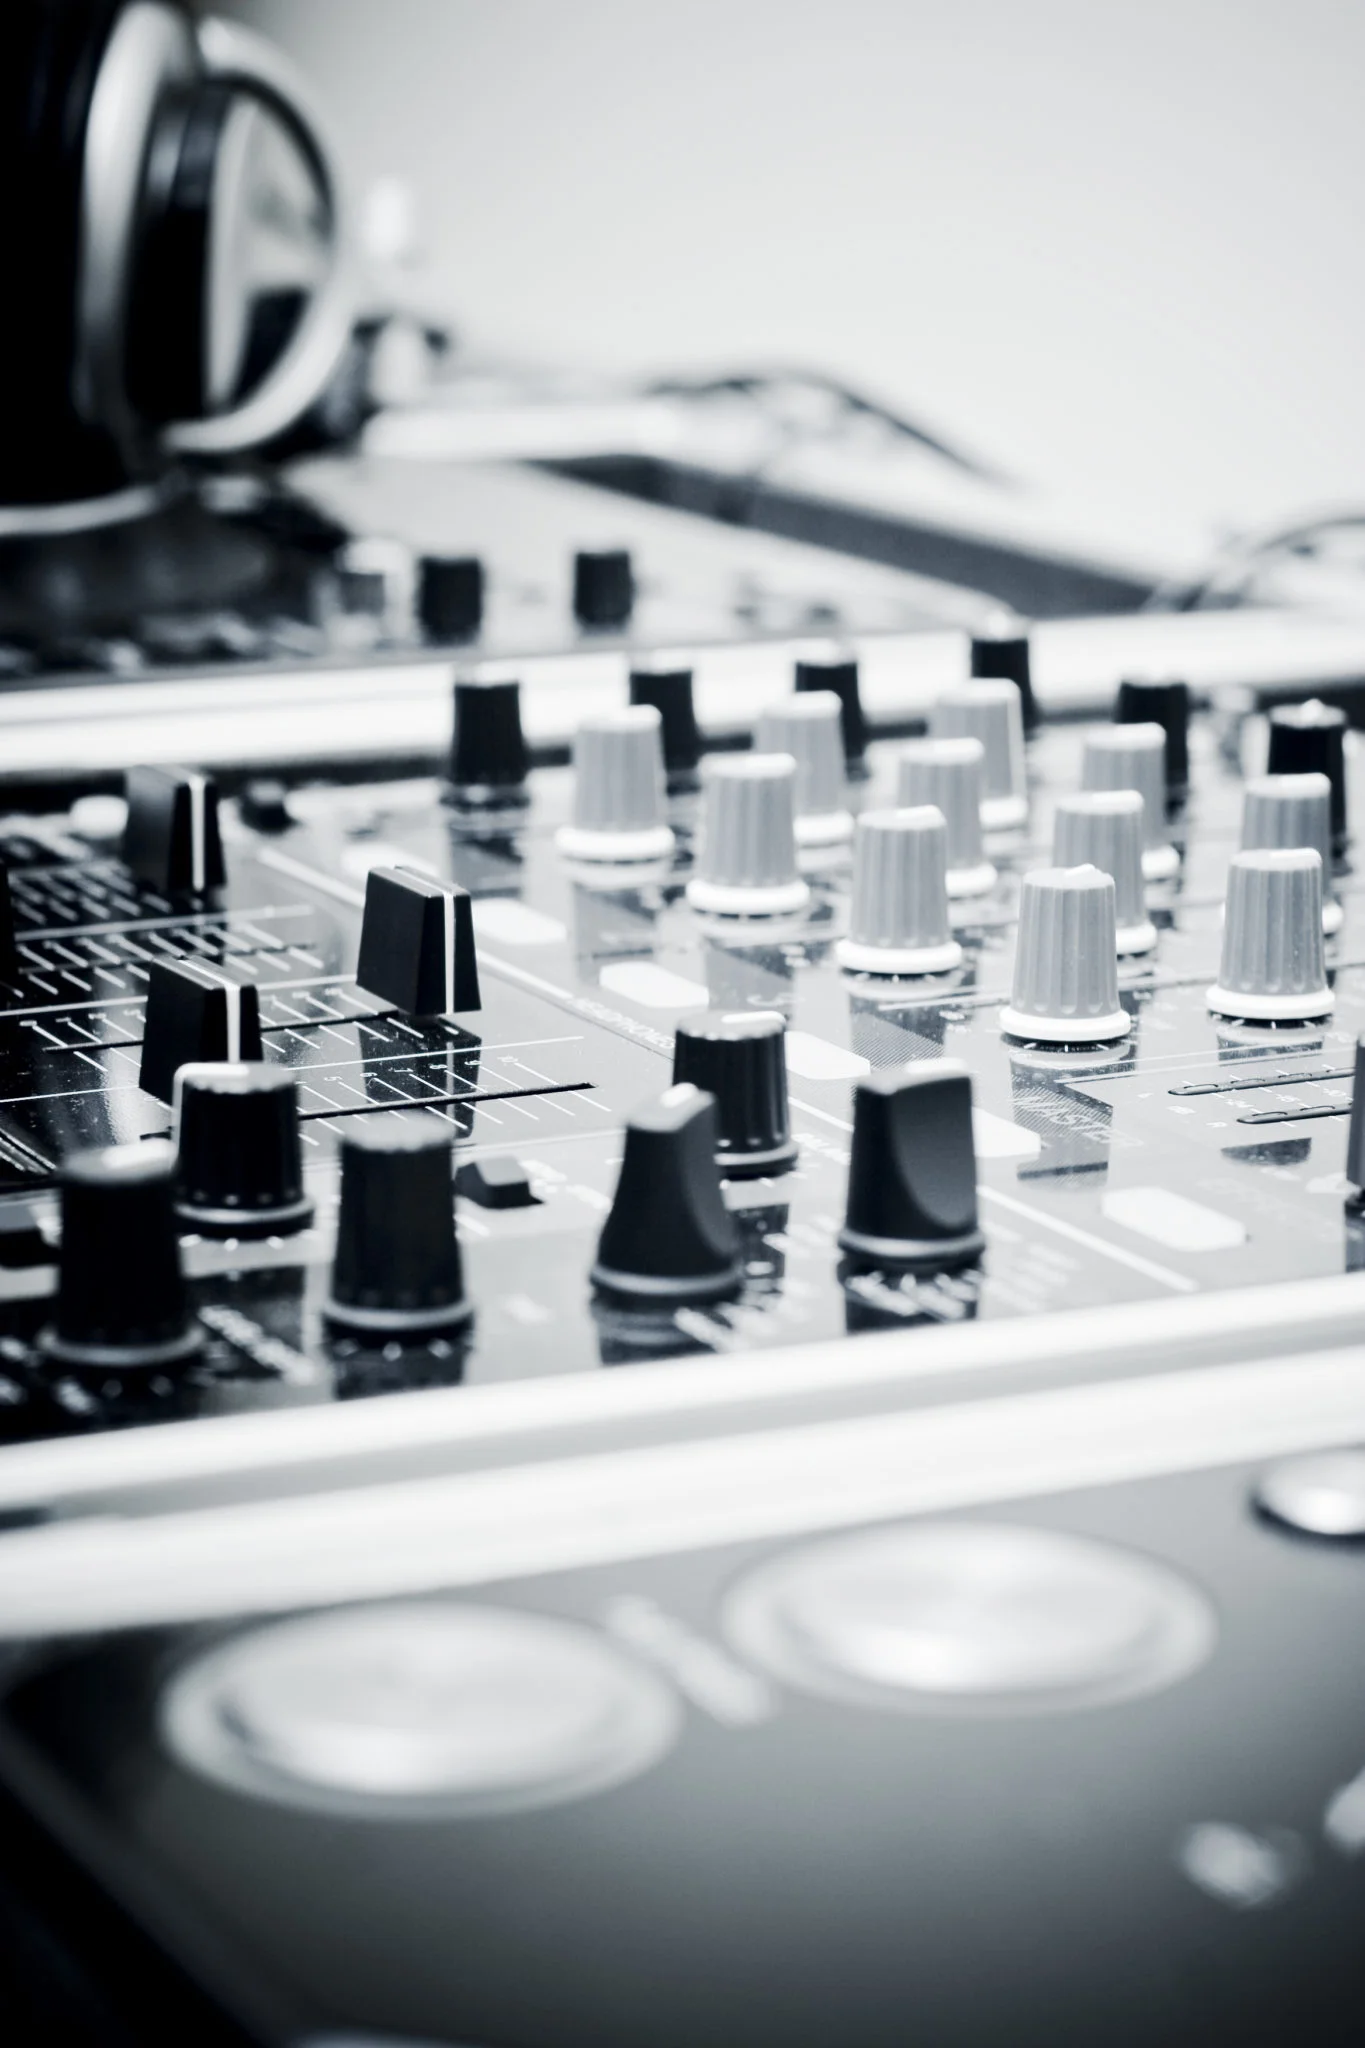 How to your DJ Mix with your laptop - Become a DJ